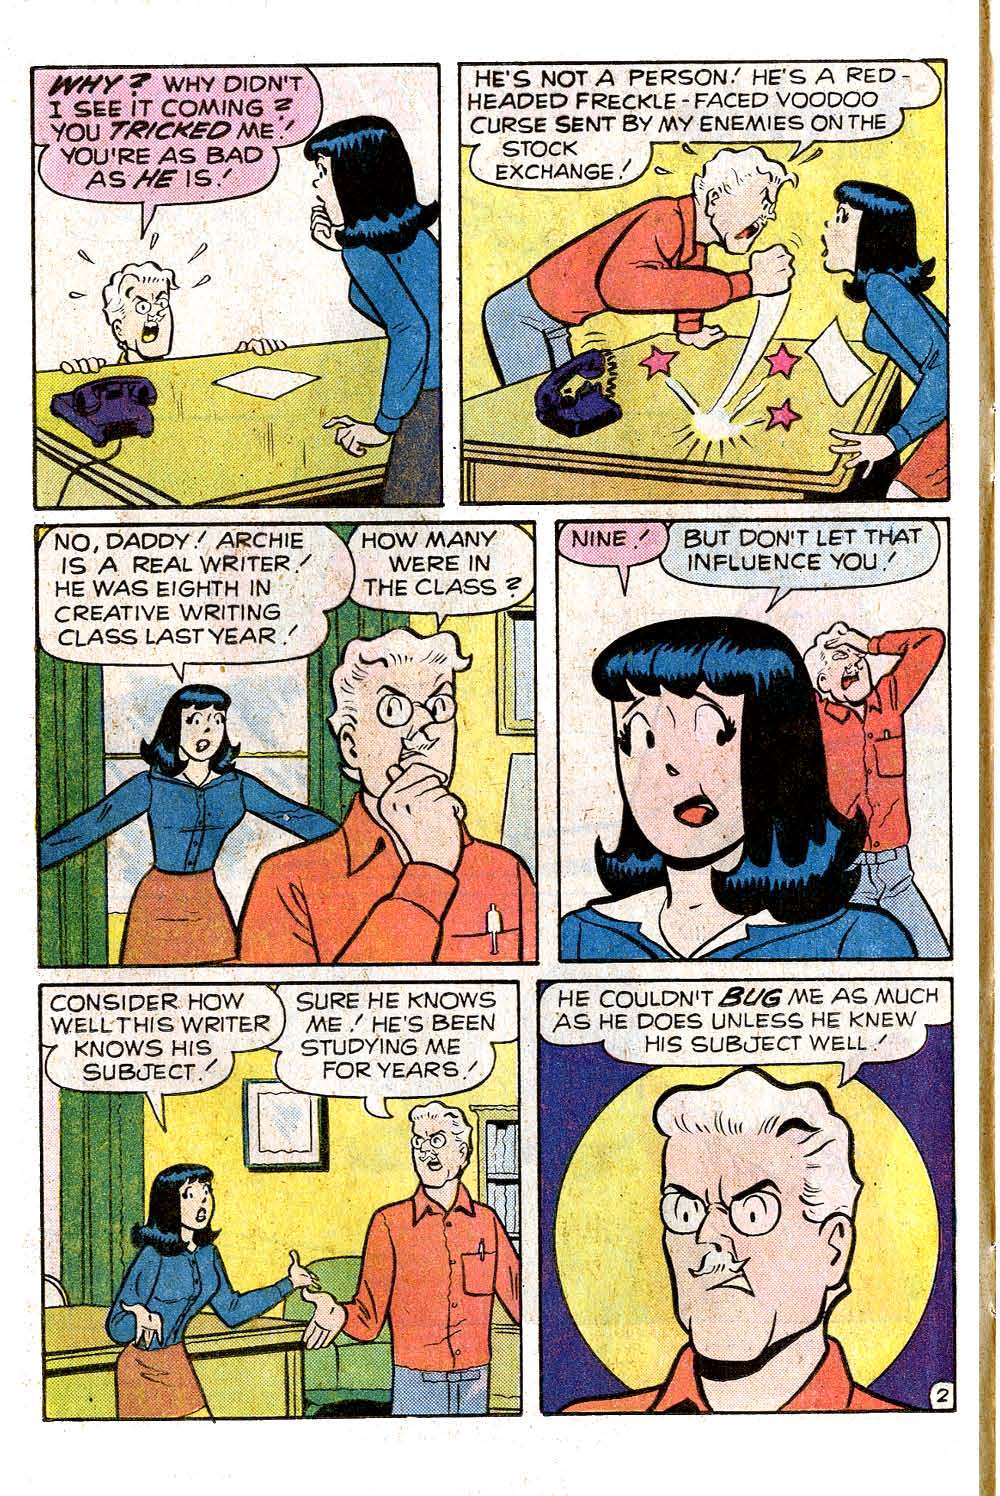 Archie (1960) 254 Page 4